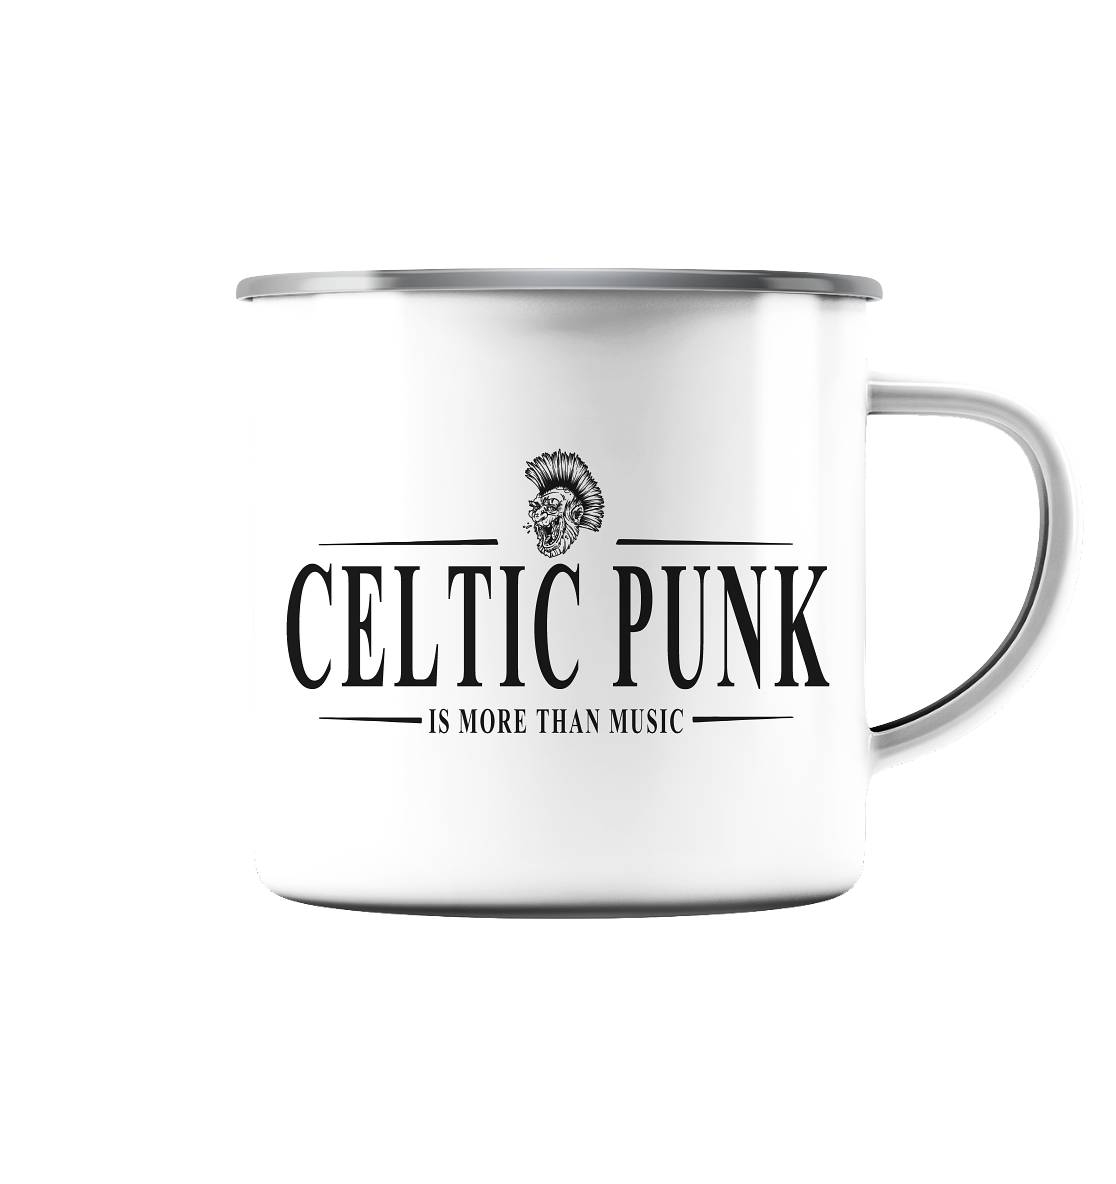 Celtic Punk "Is More Than Music" - Emaille Tasse (Silber)